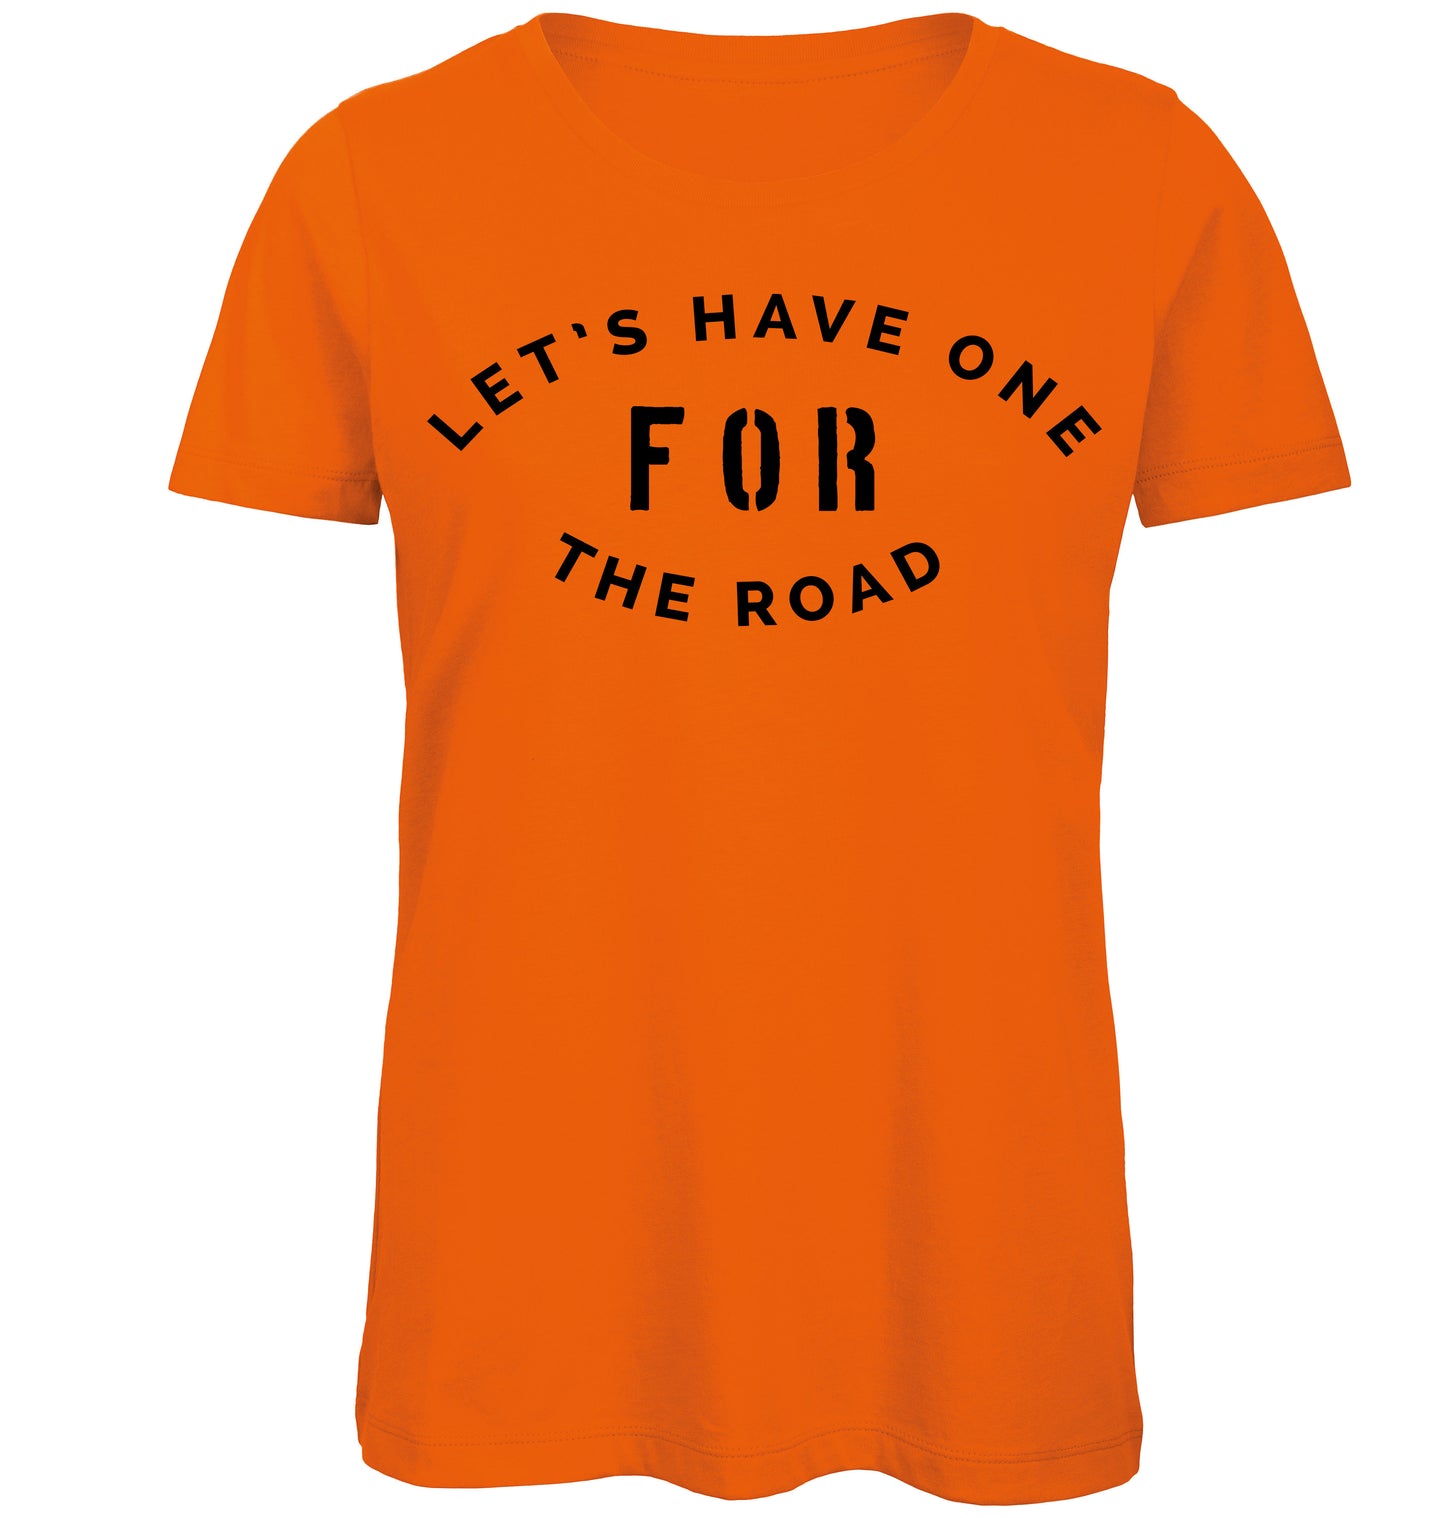 One for the road Ladies T-Shirt